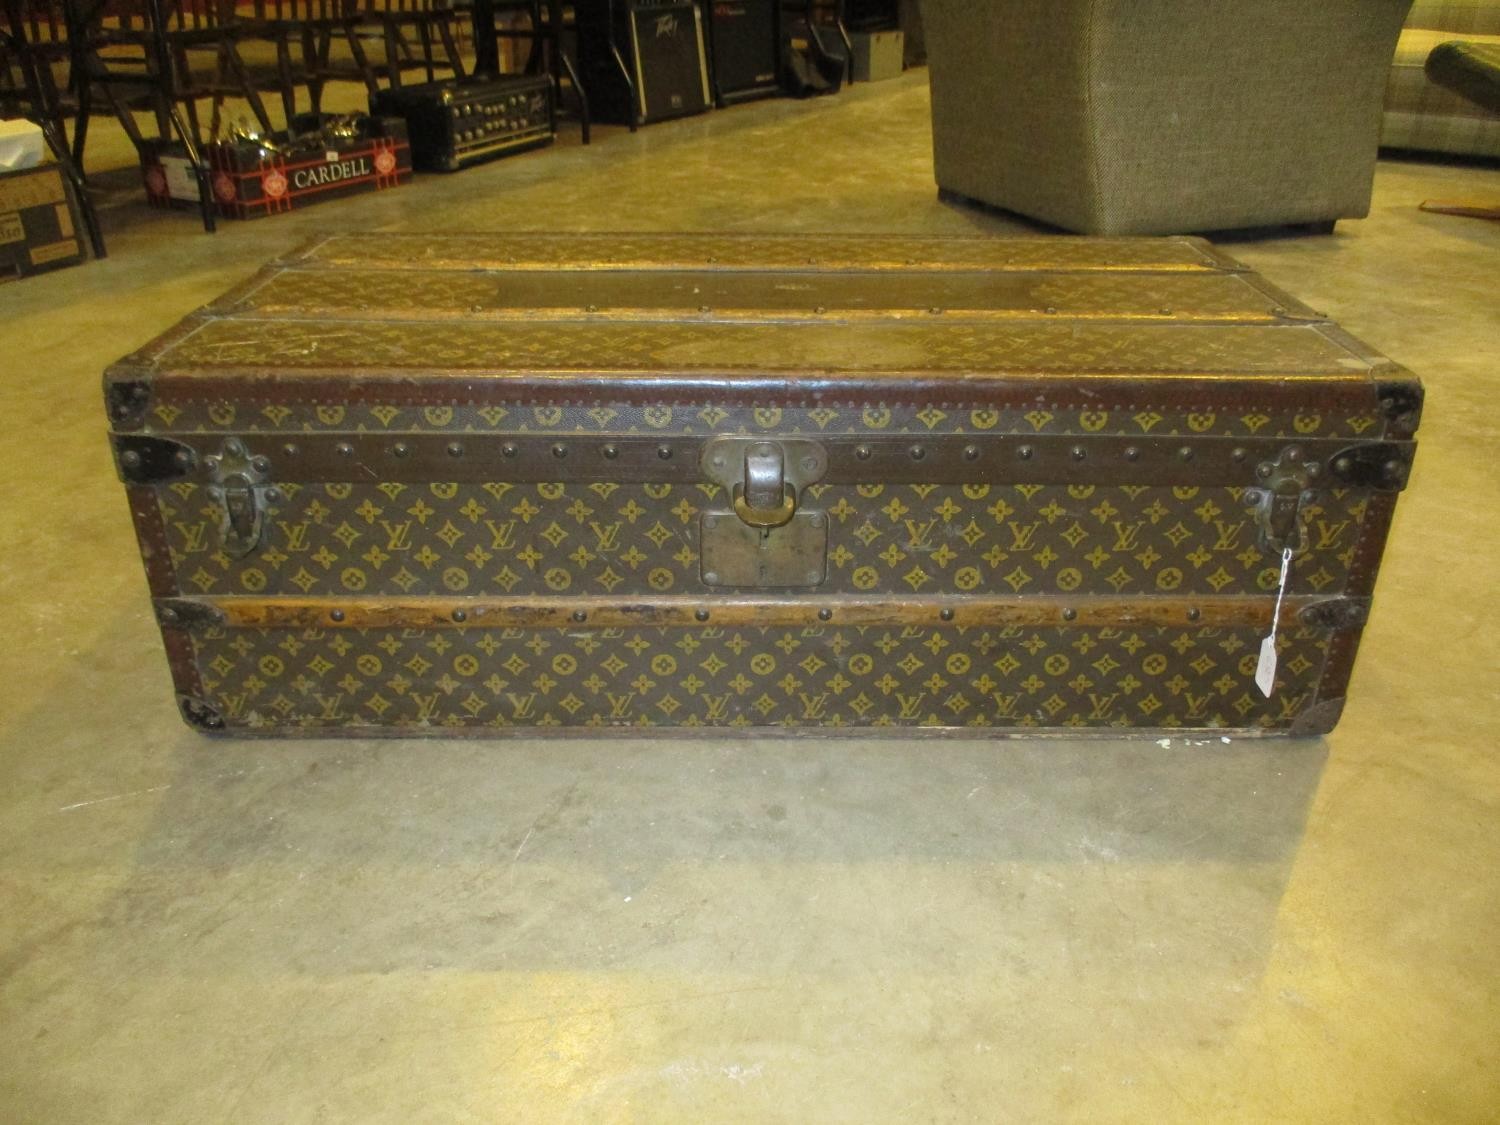 Louis Vuitton Cabin Trunk, Early 20th Century, covered in monogram canvas with Louis Vuitton label - Image 2 of 11